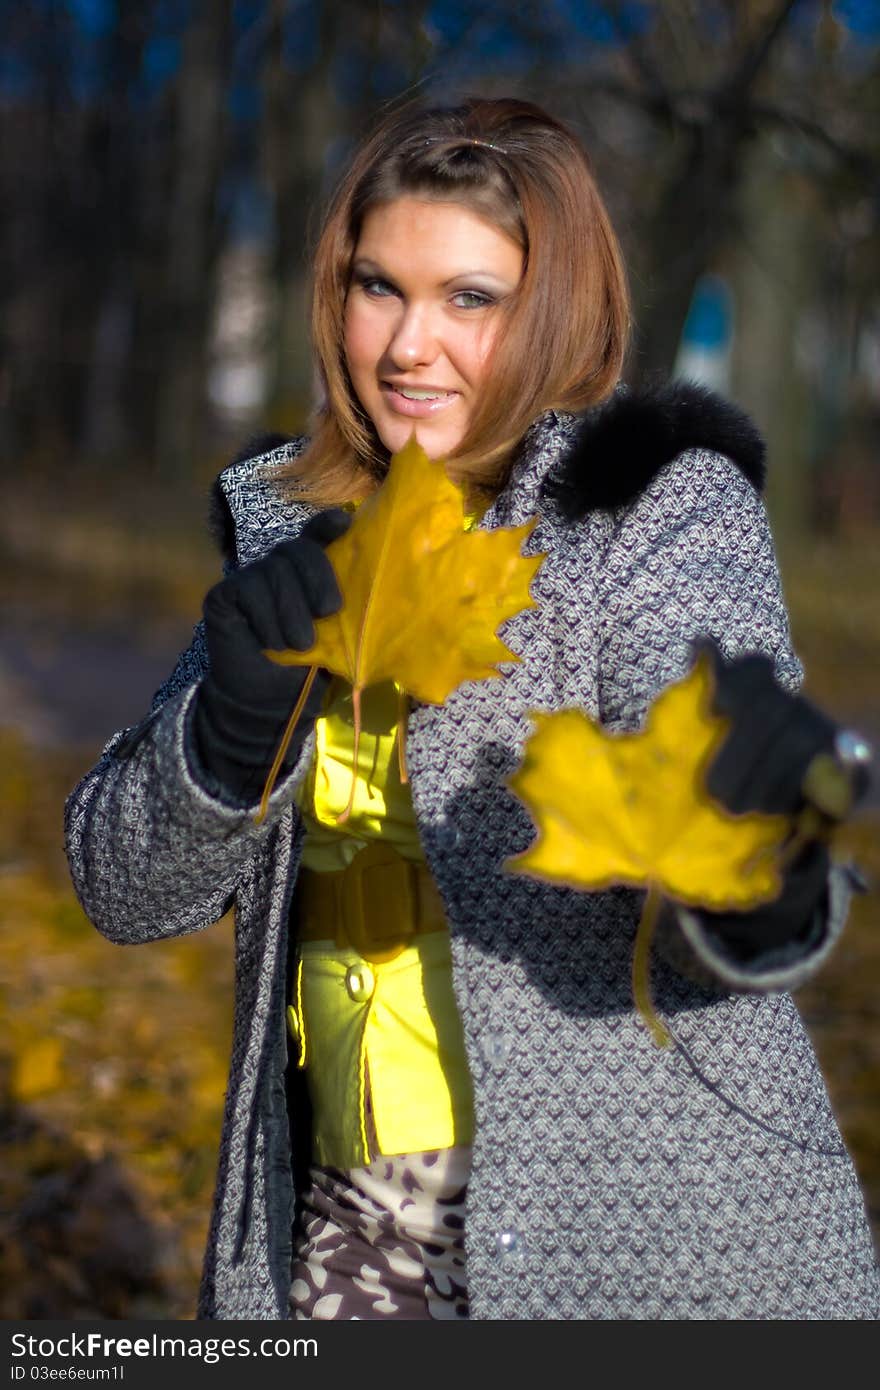 Portrai of beautiful smiling young girl with yellow dry leaves in fall park. Portrai of beautiful smiling young girl with yellow dry leaves in fall park